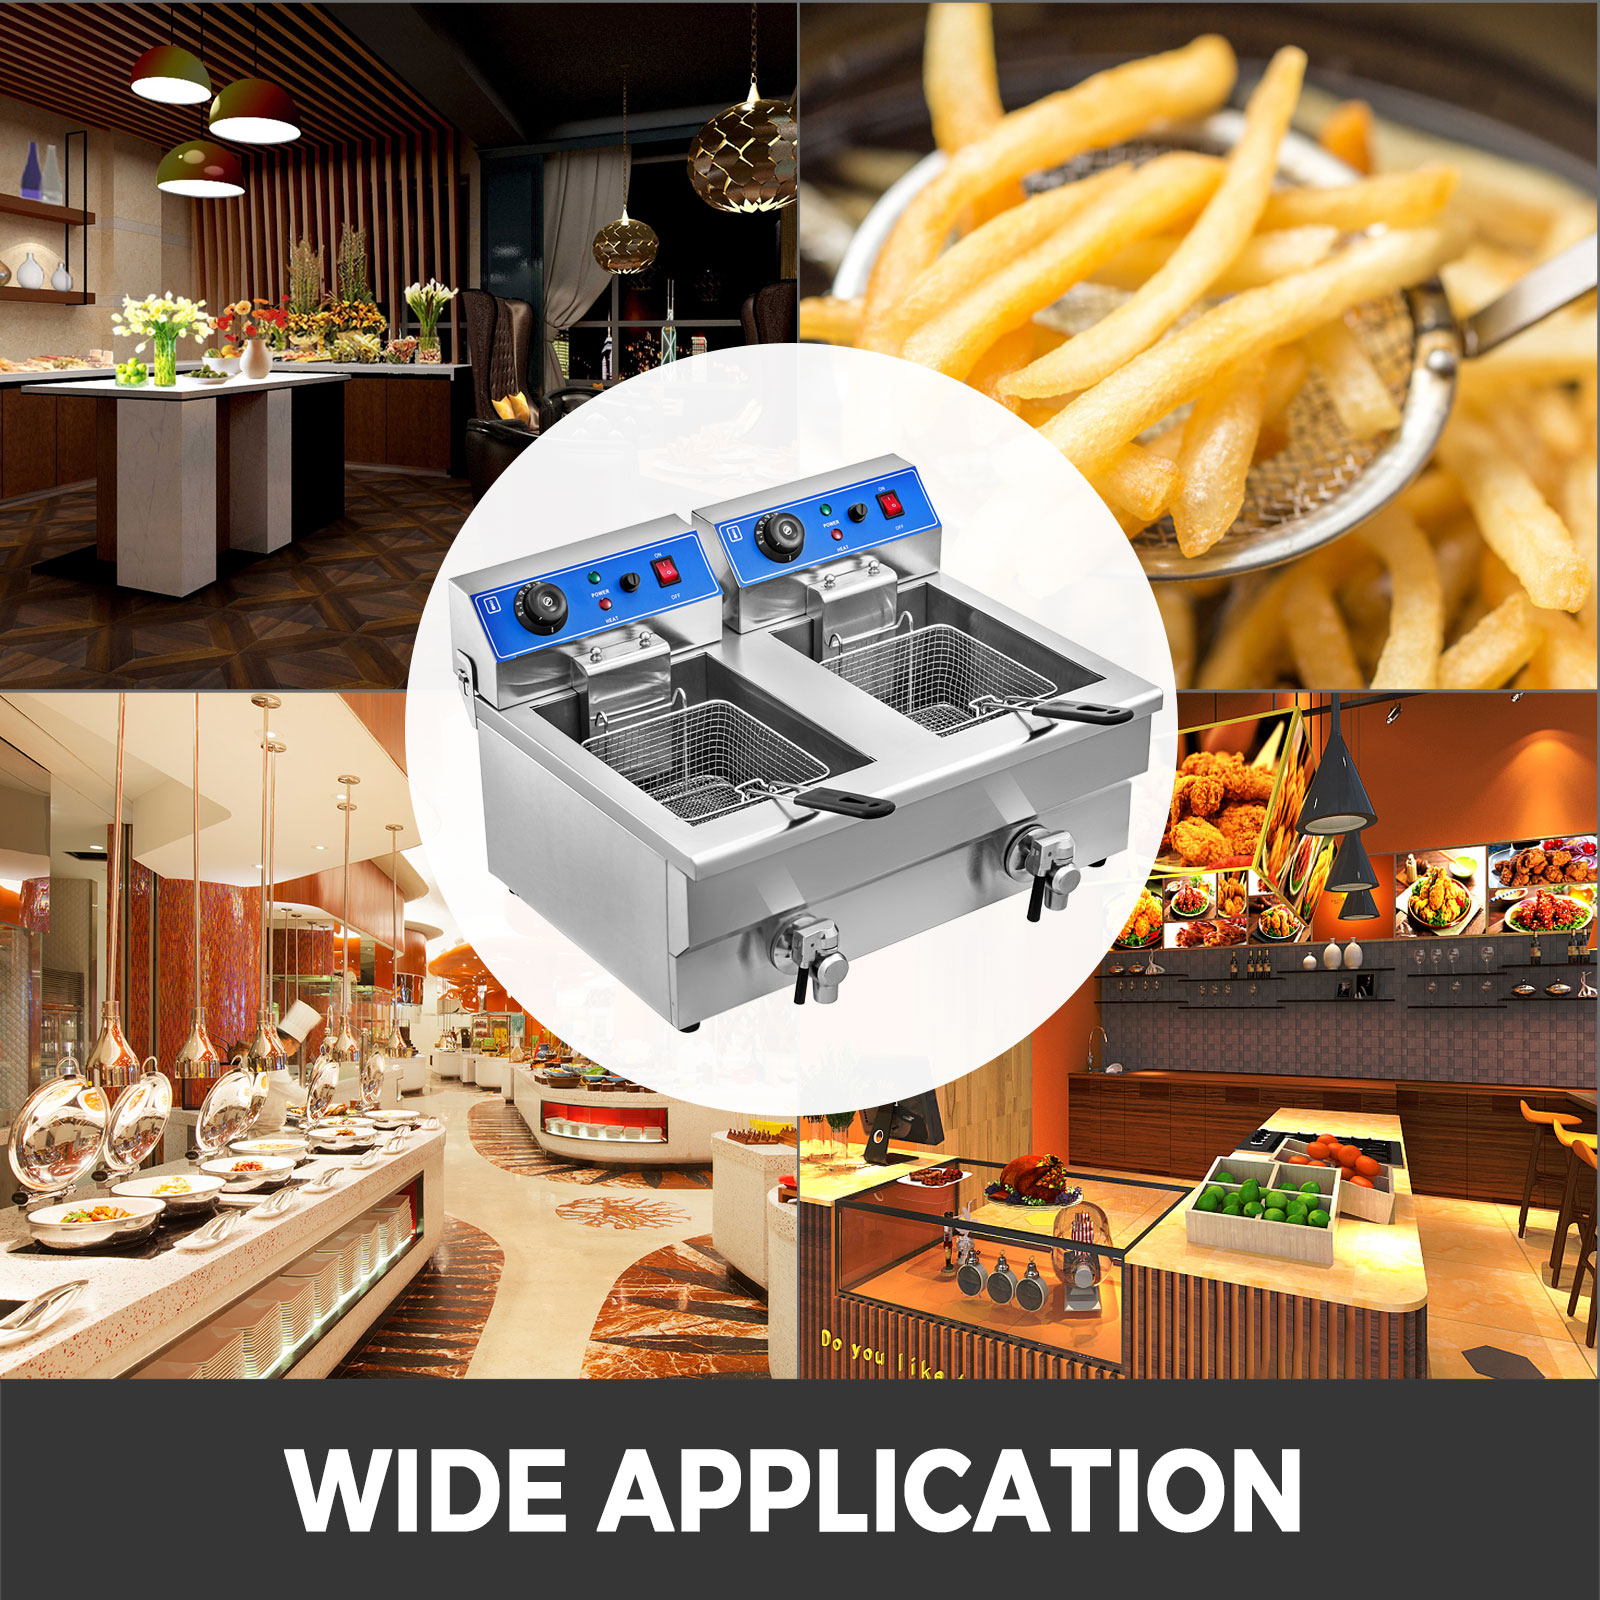 https://d2qc09rl1gfuof.cloudfront.net/product/YB-102VDZL0000001/fryers-with-baskets-m100-7.jpg